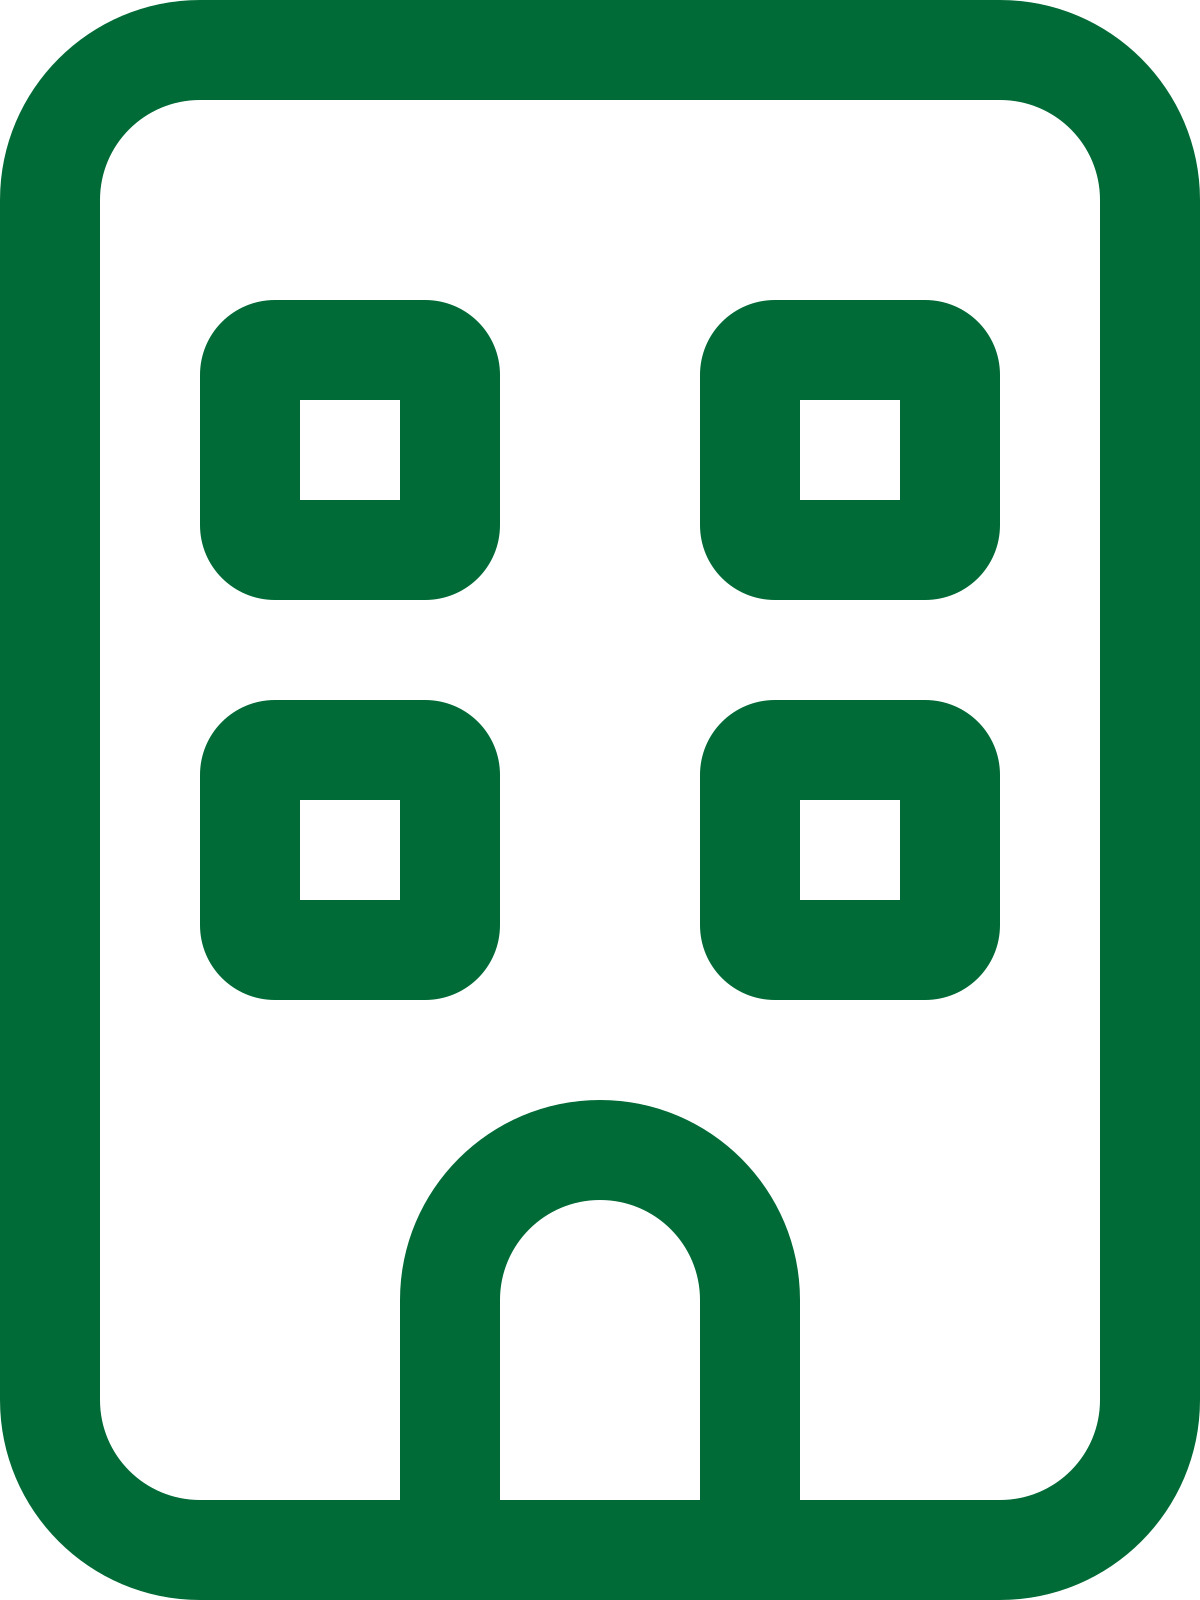 Green building icon